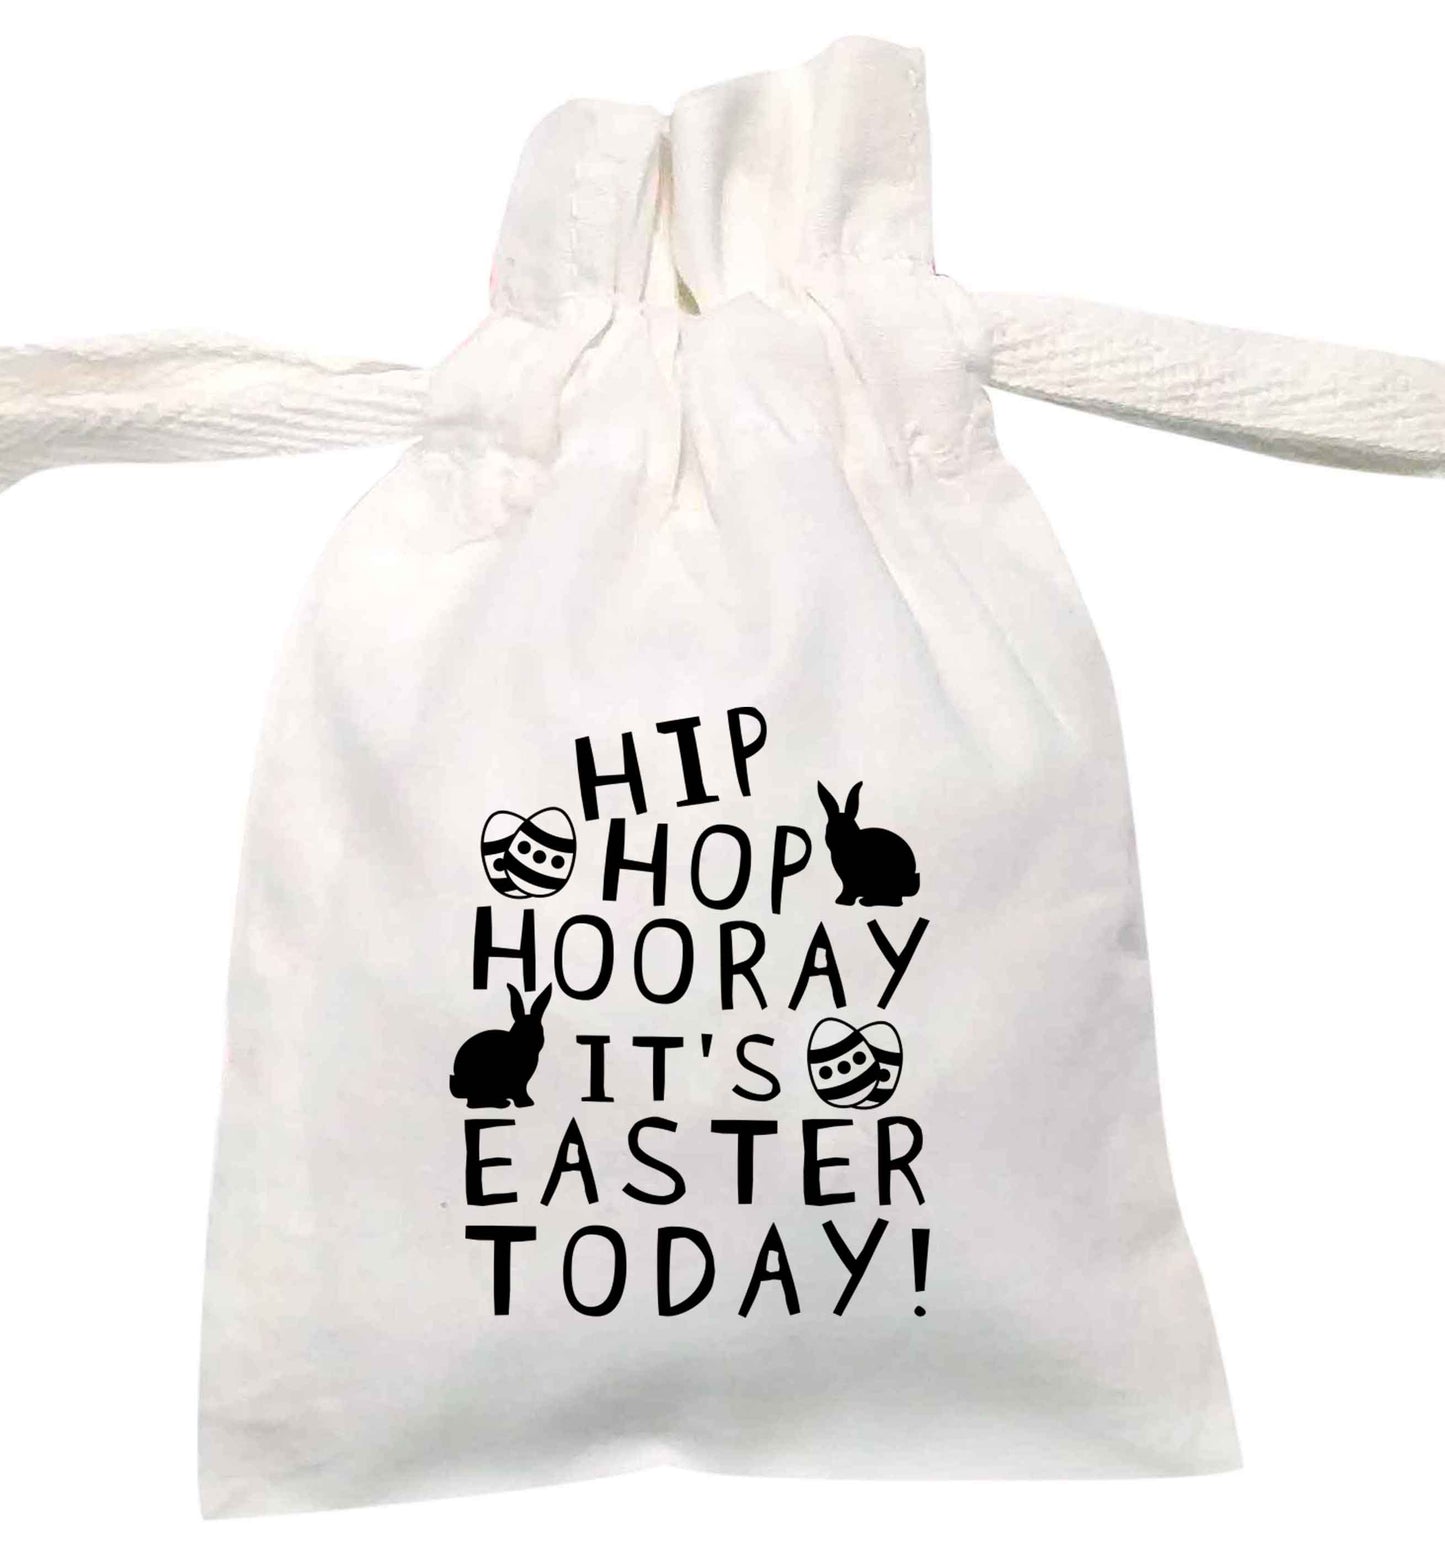 Hip hip hooray it's Easter today! | XS - L | Pouch / Drawstring bag / Sack | Organic Cotton | Bulk discounts available!